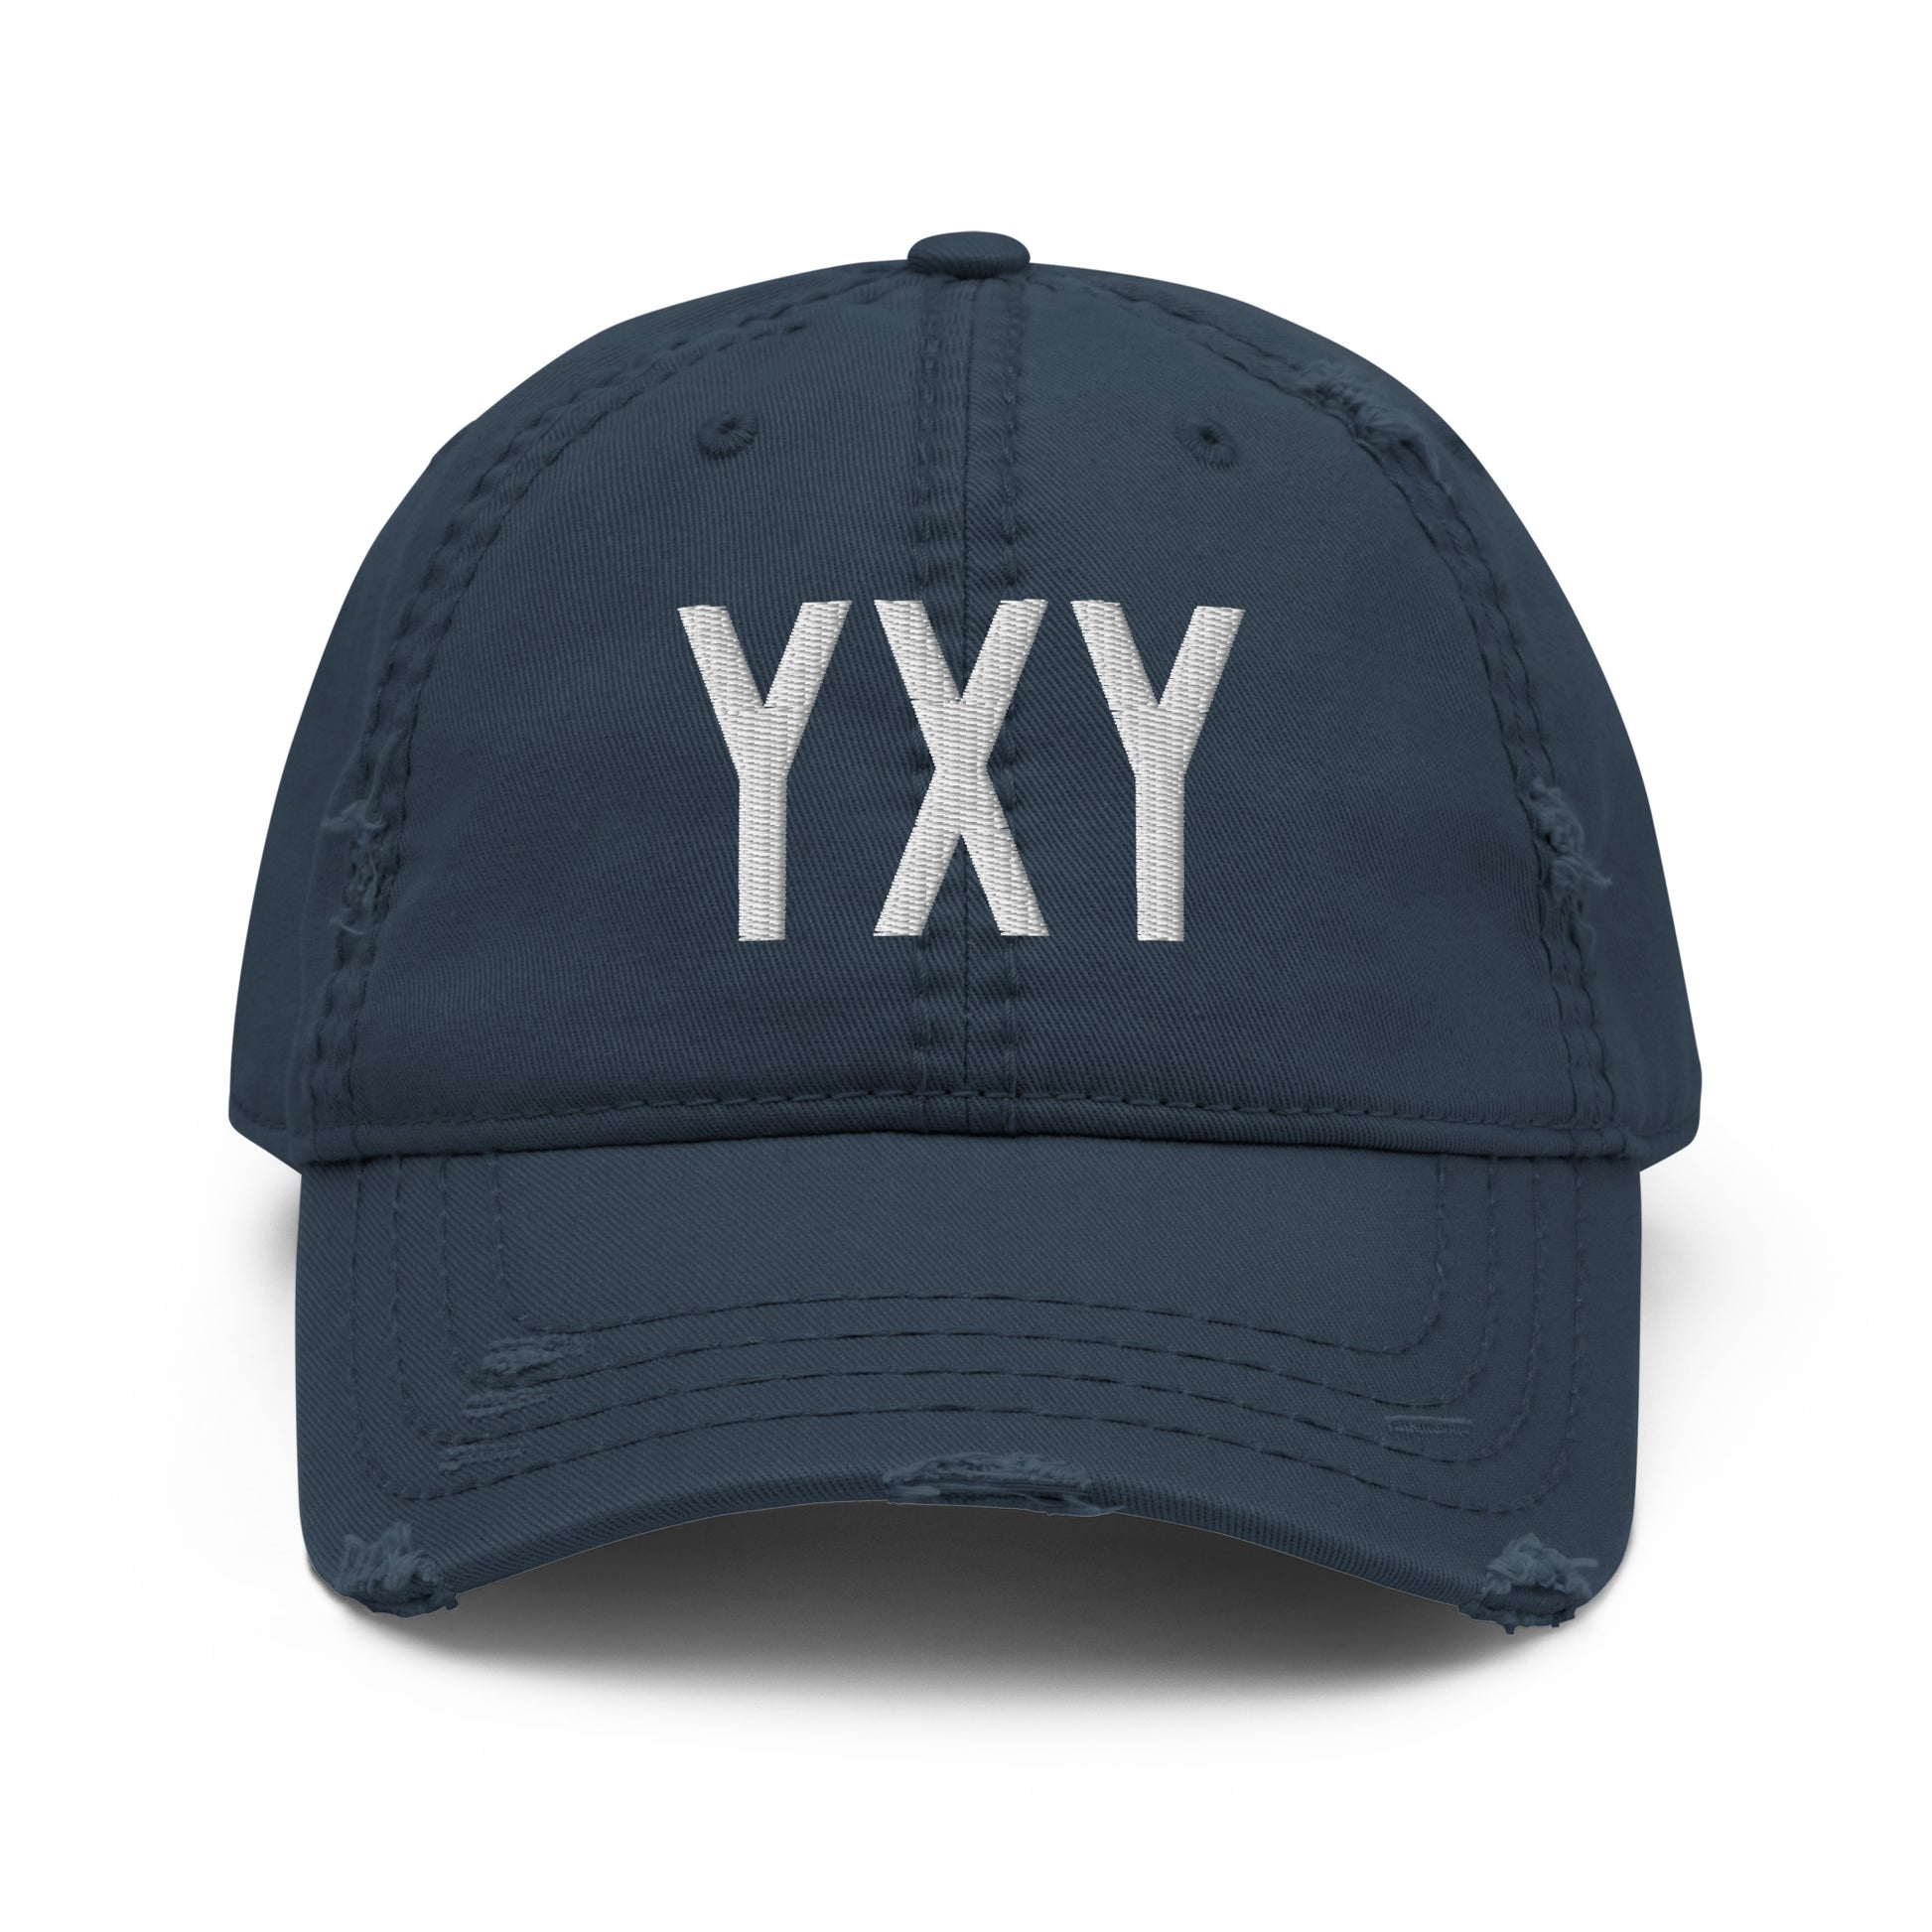 Airport Code Distressed Hat - White • YXY Whitehorse • YHM Designs - Image 13